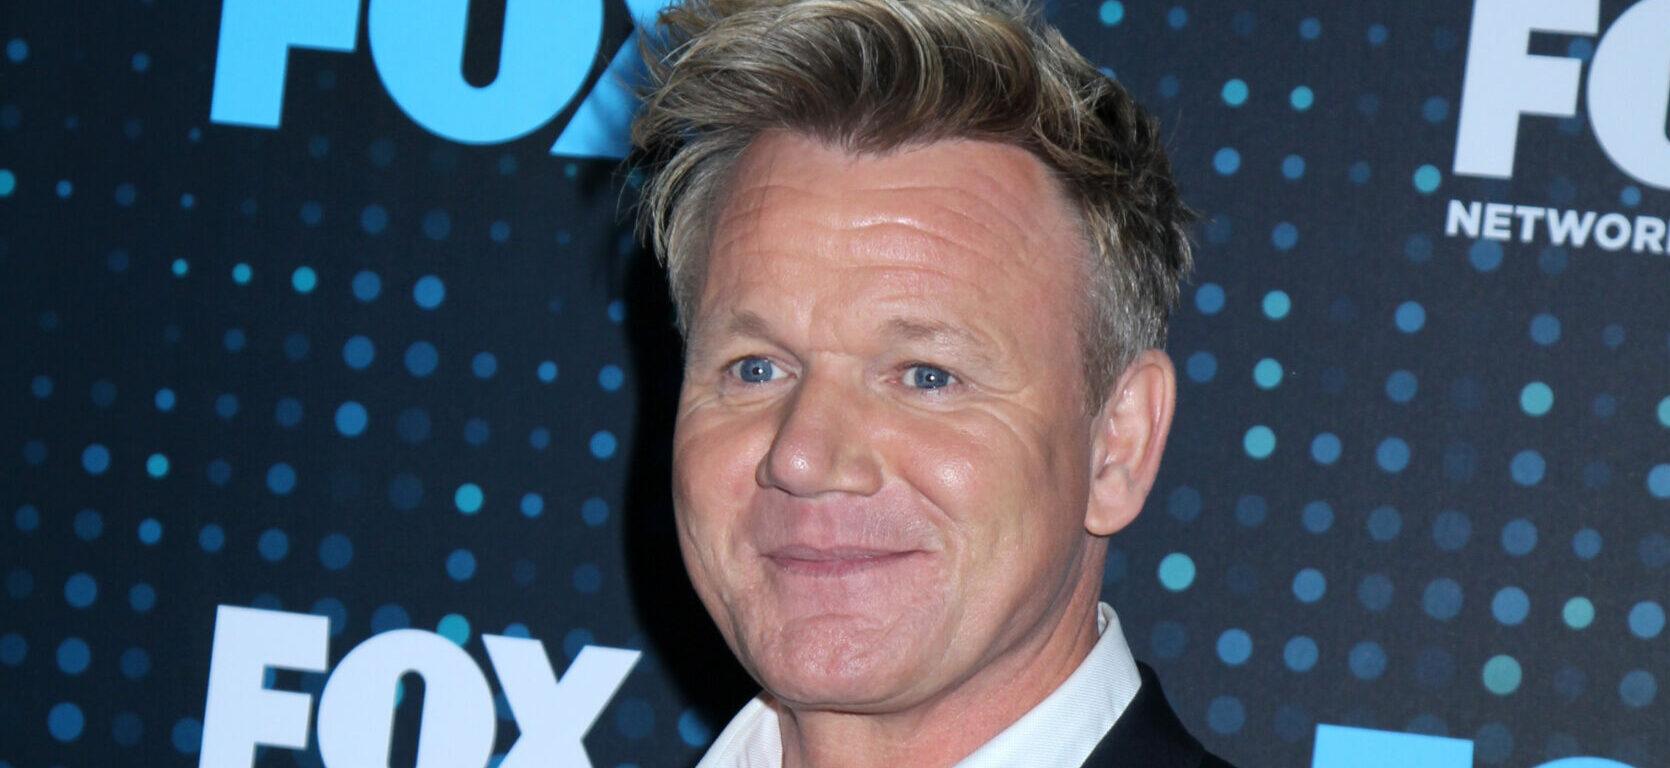 Gordon Ramsay Welcomes ‘Whopper’ Sixth Child: How Much Did He Weigh?!